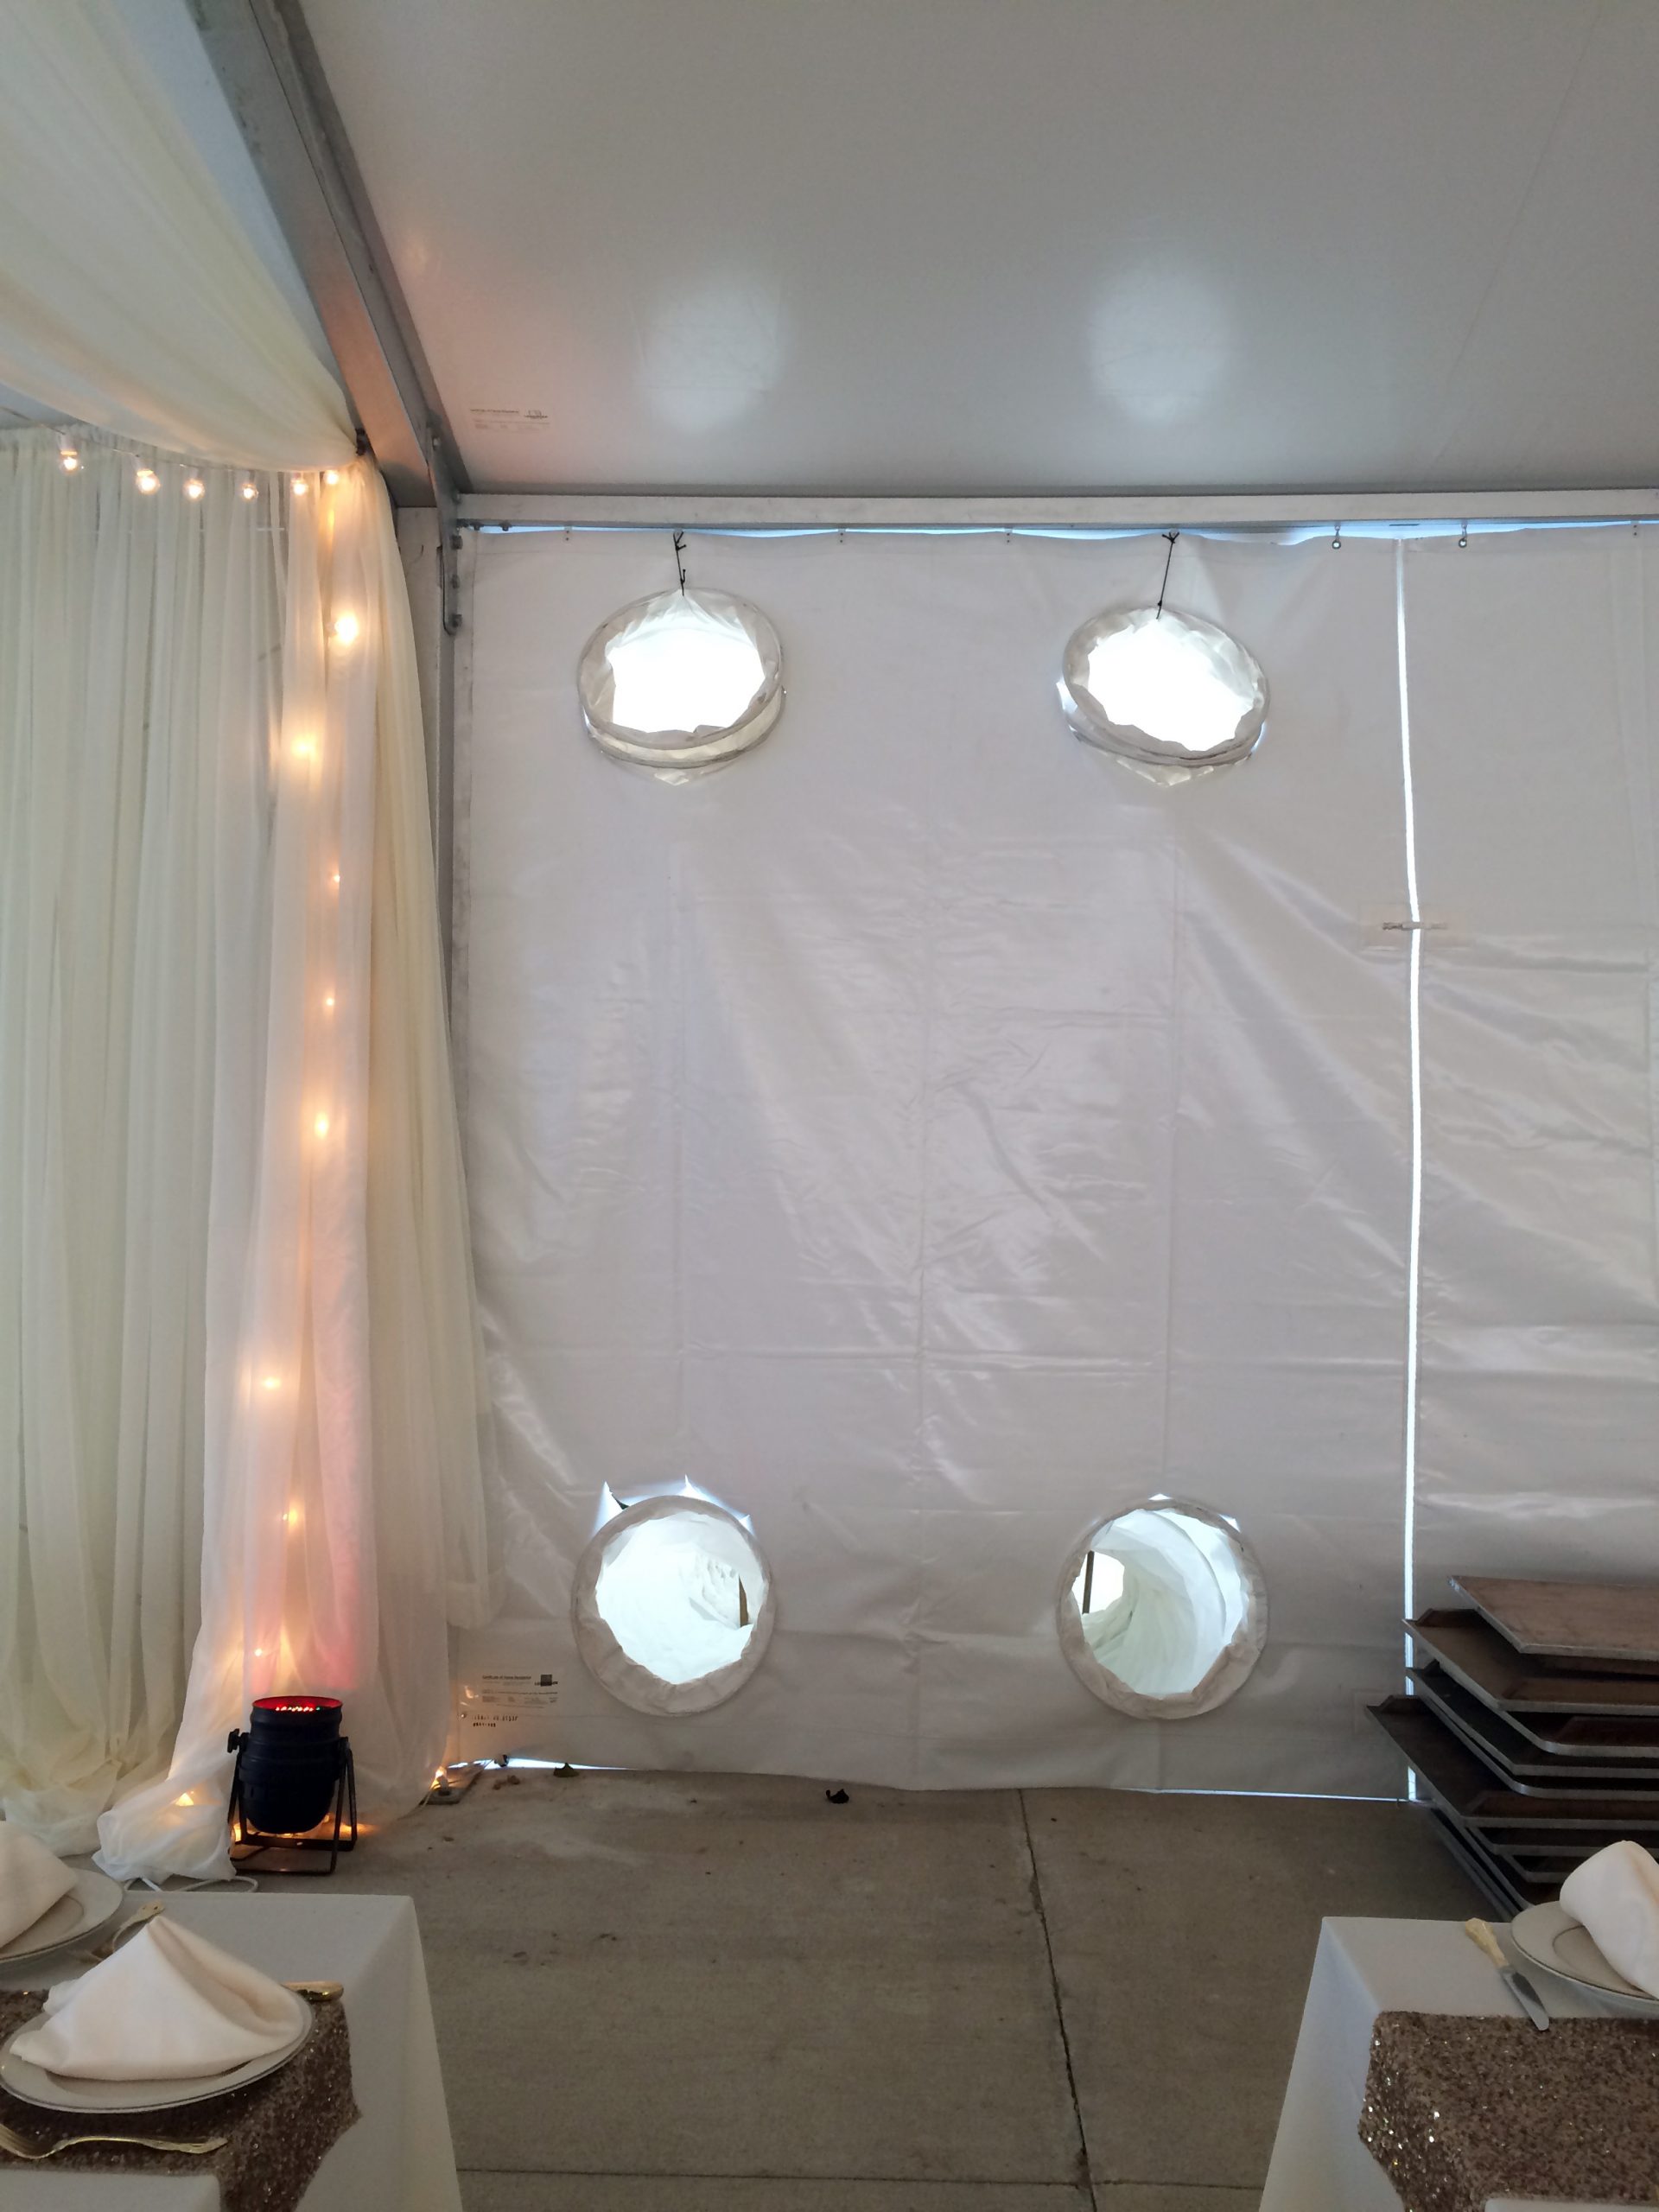 Inside tent view of air conditioning ducts